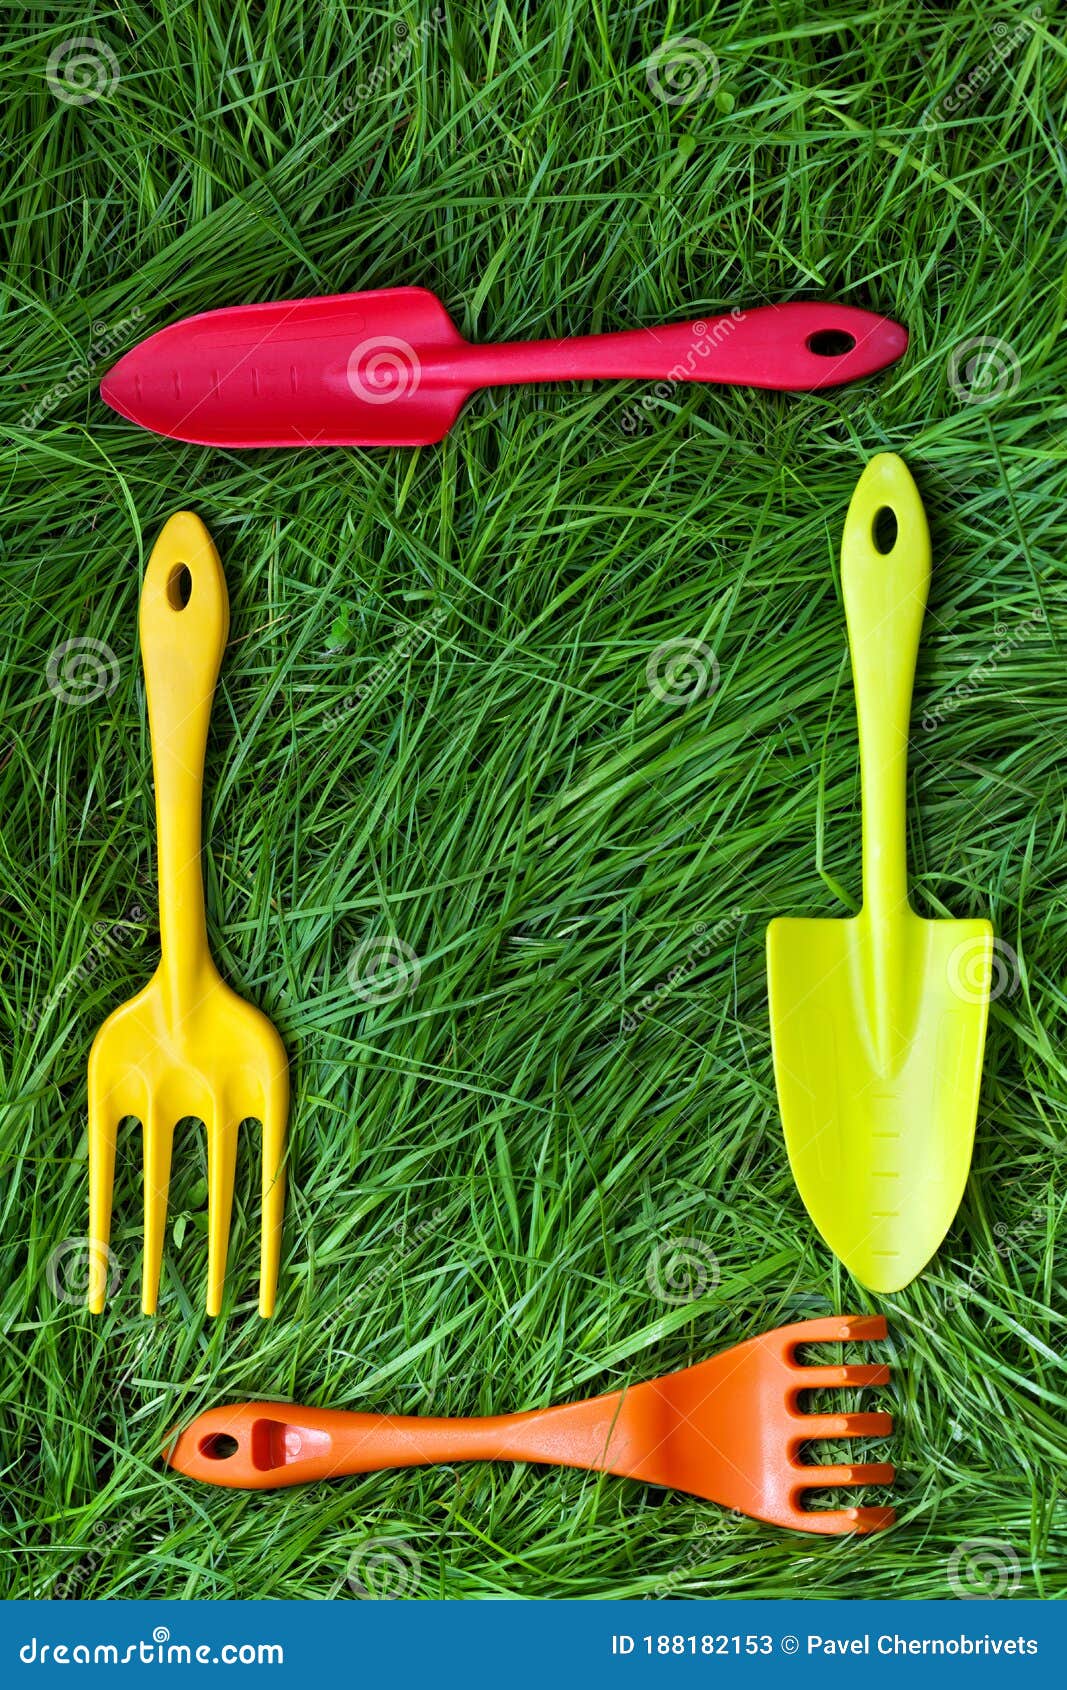 Set of Gardening Tools on Grass Stock Image - Image of environment ...